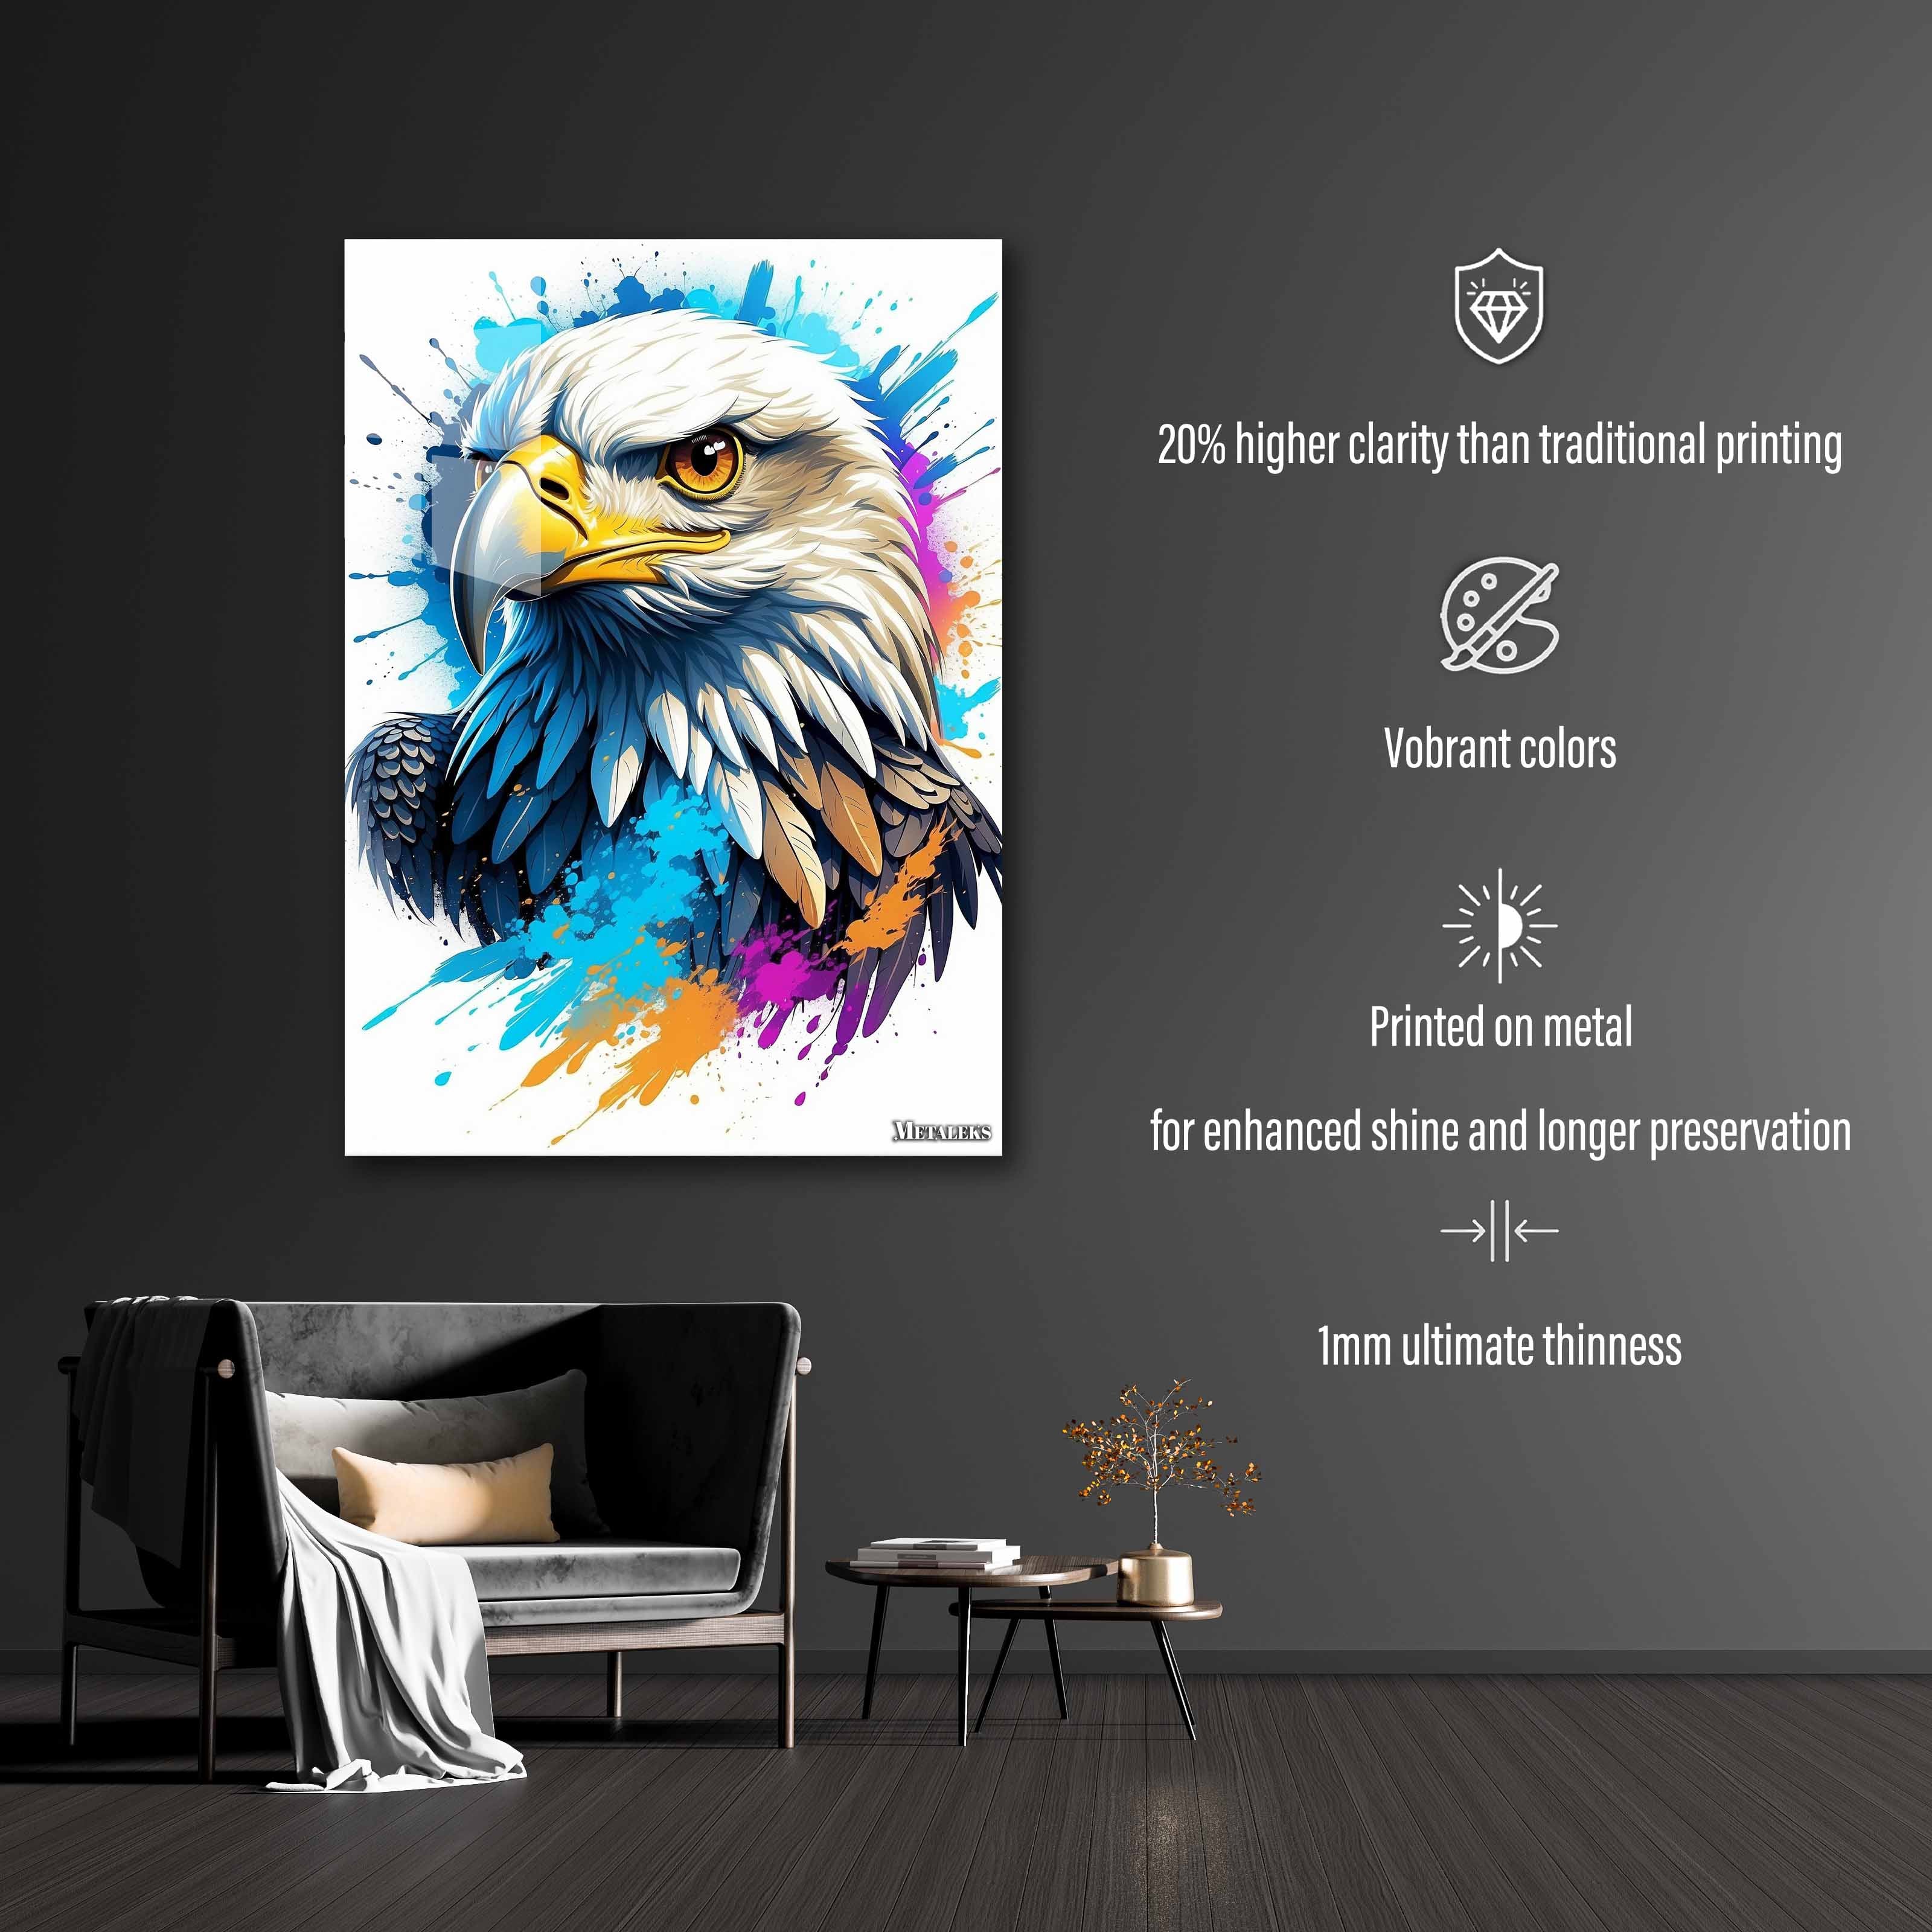 Majestic Soar: Portrait of a Noble Eagle-designed by @maximise